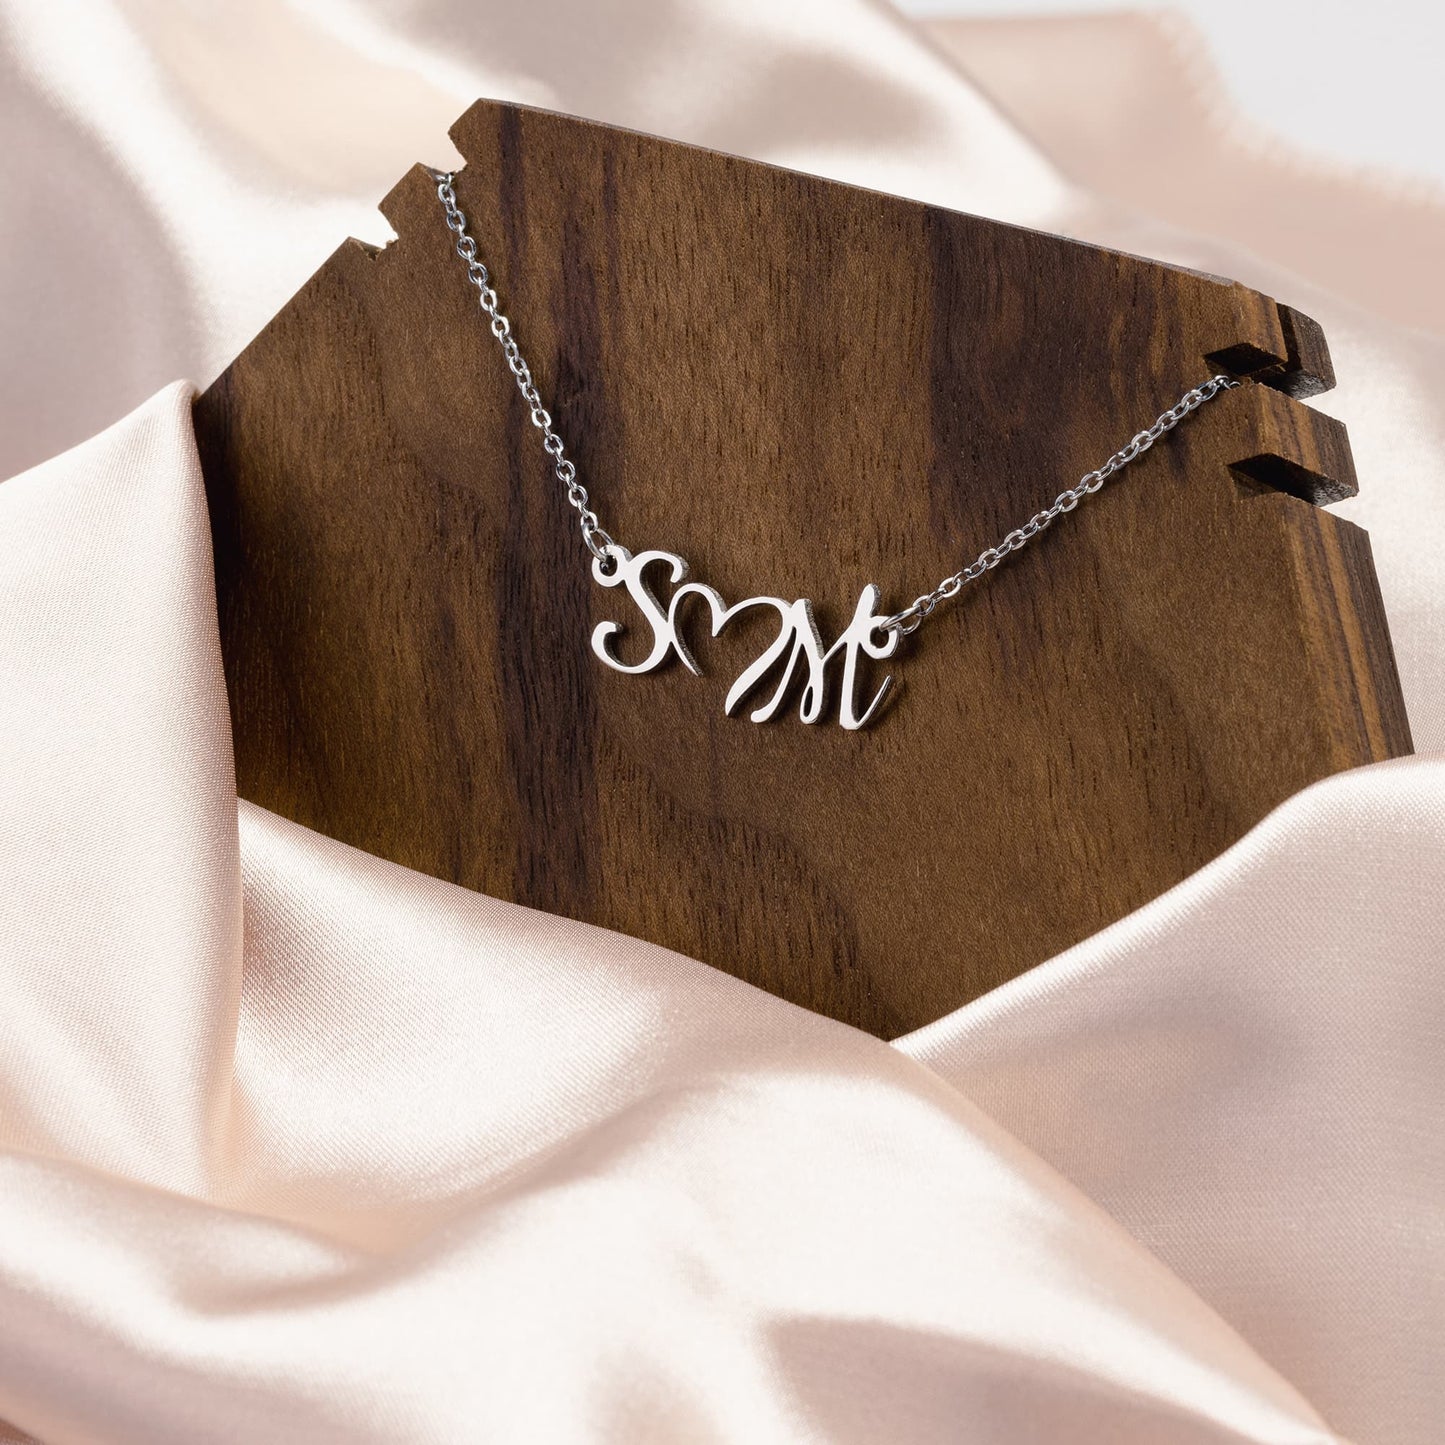 Couple's Initials Necklace (Personalize)